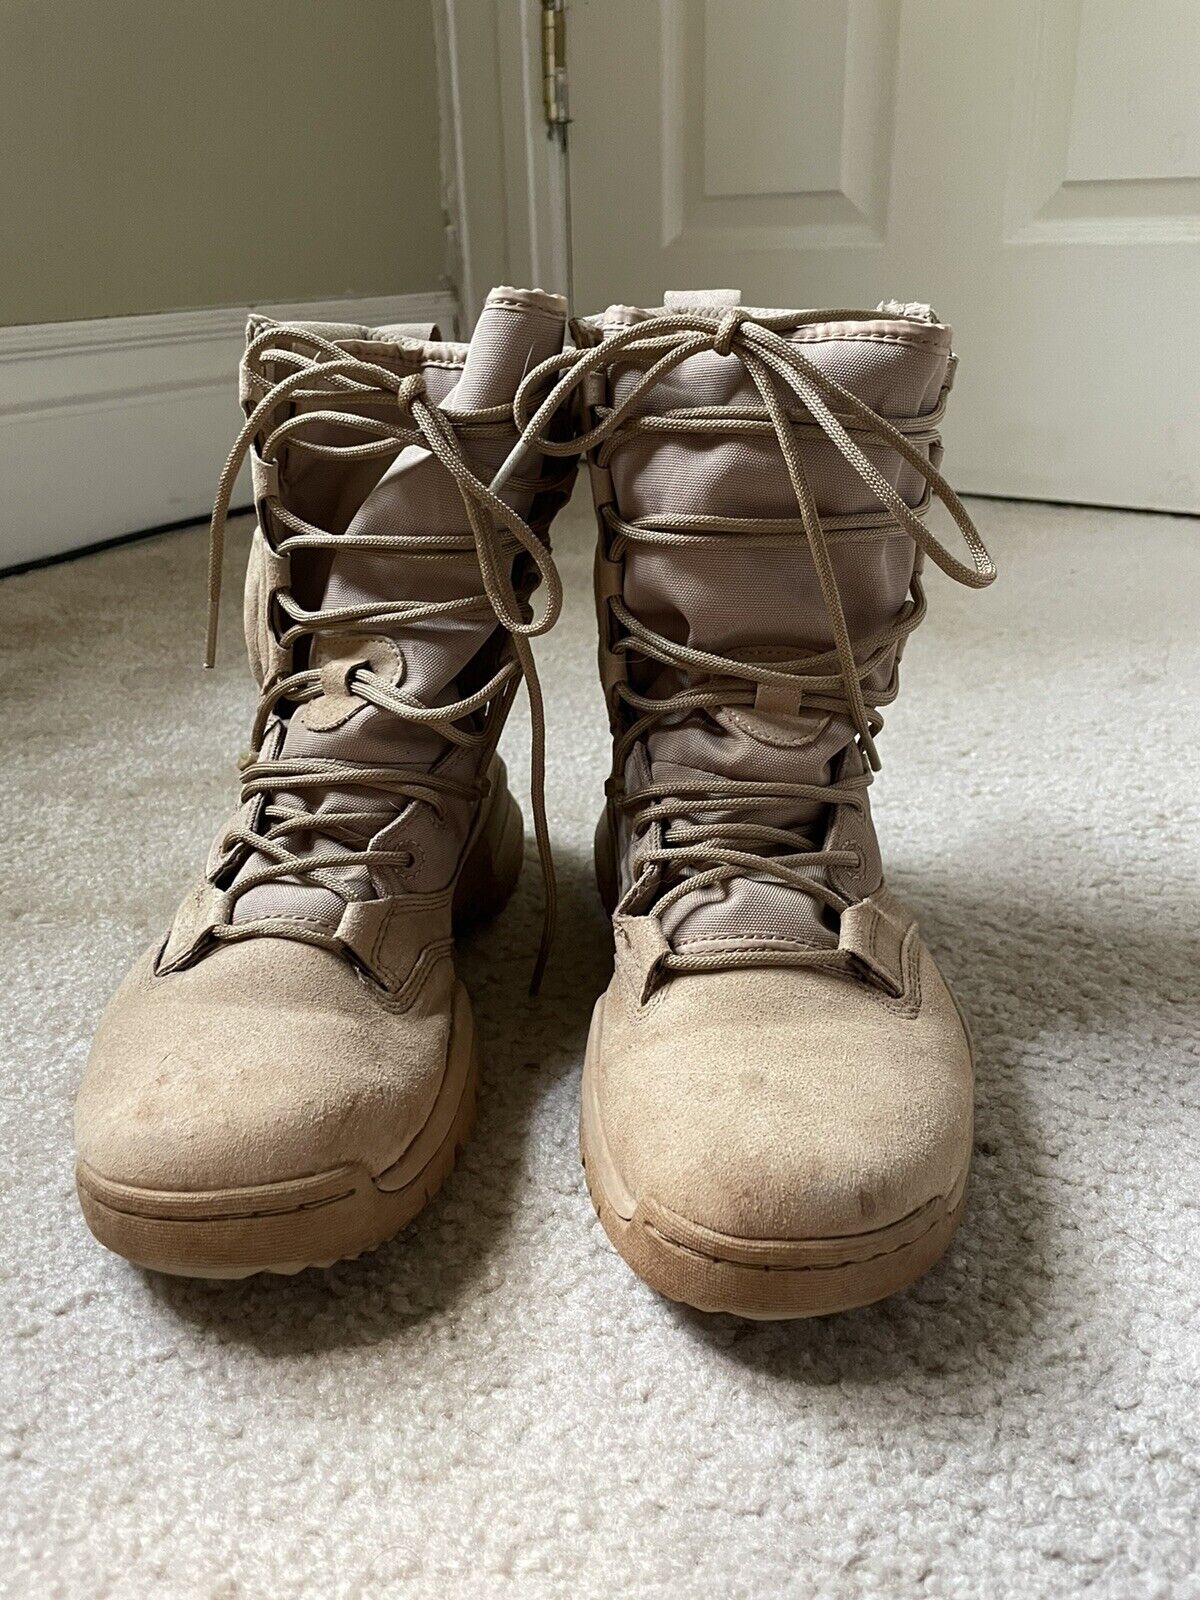 nike sfb field 2 8” tactical boot size 6